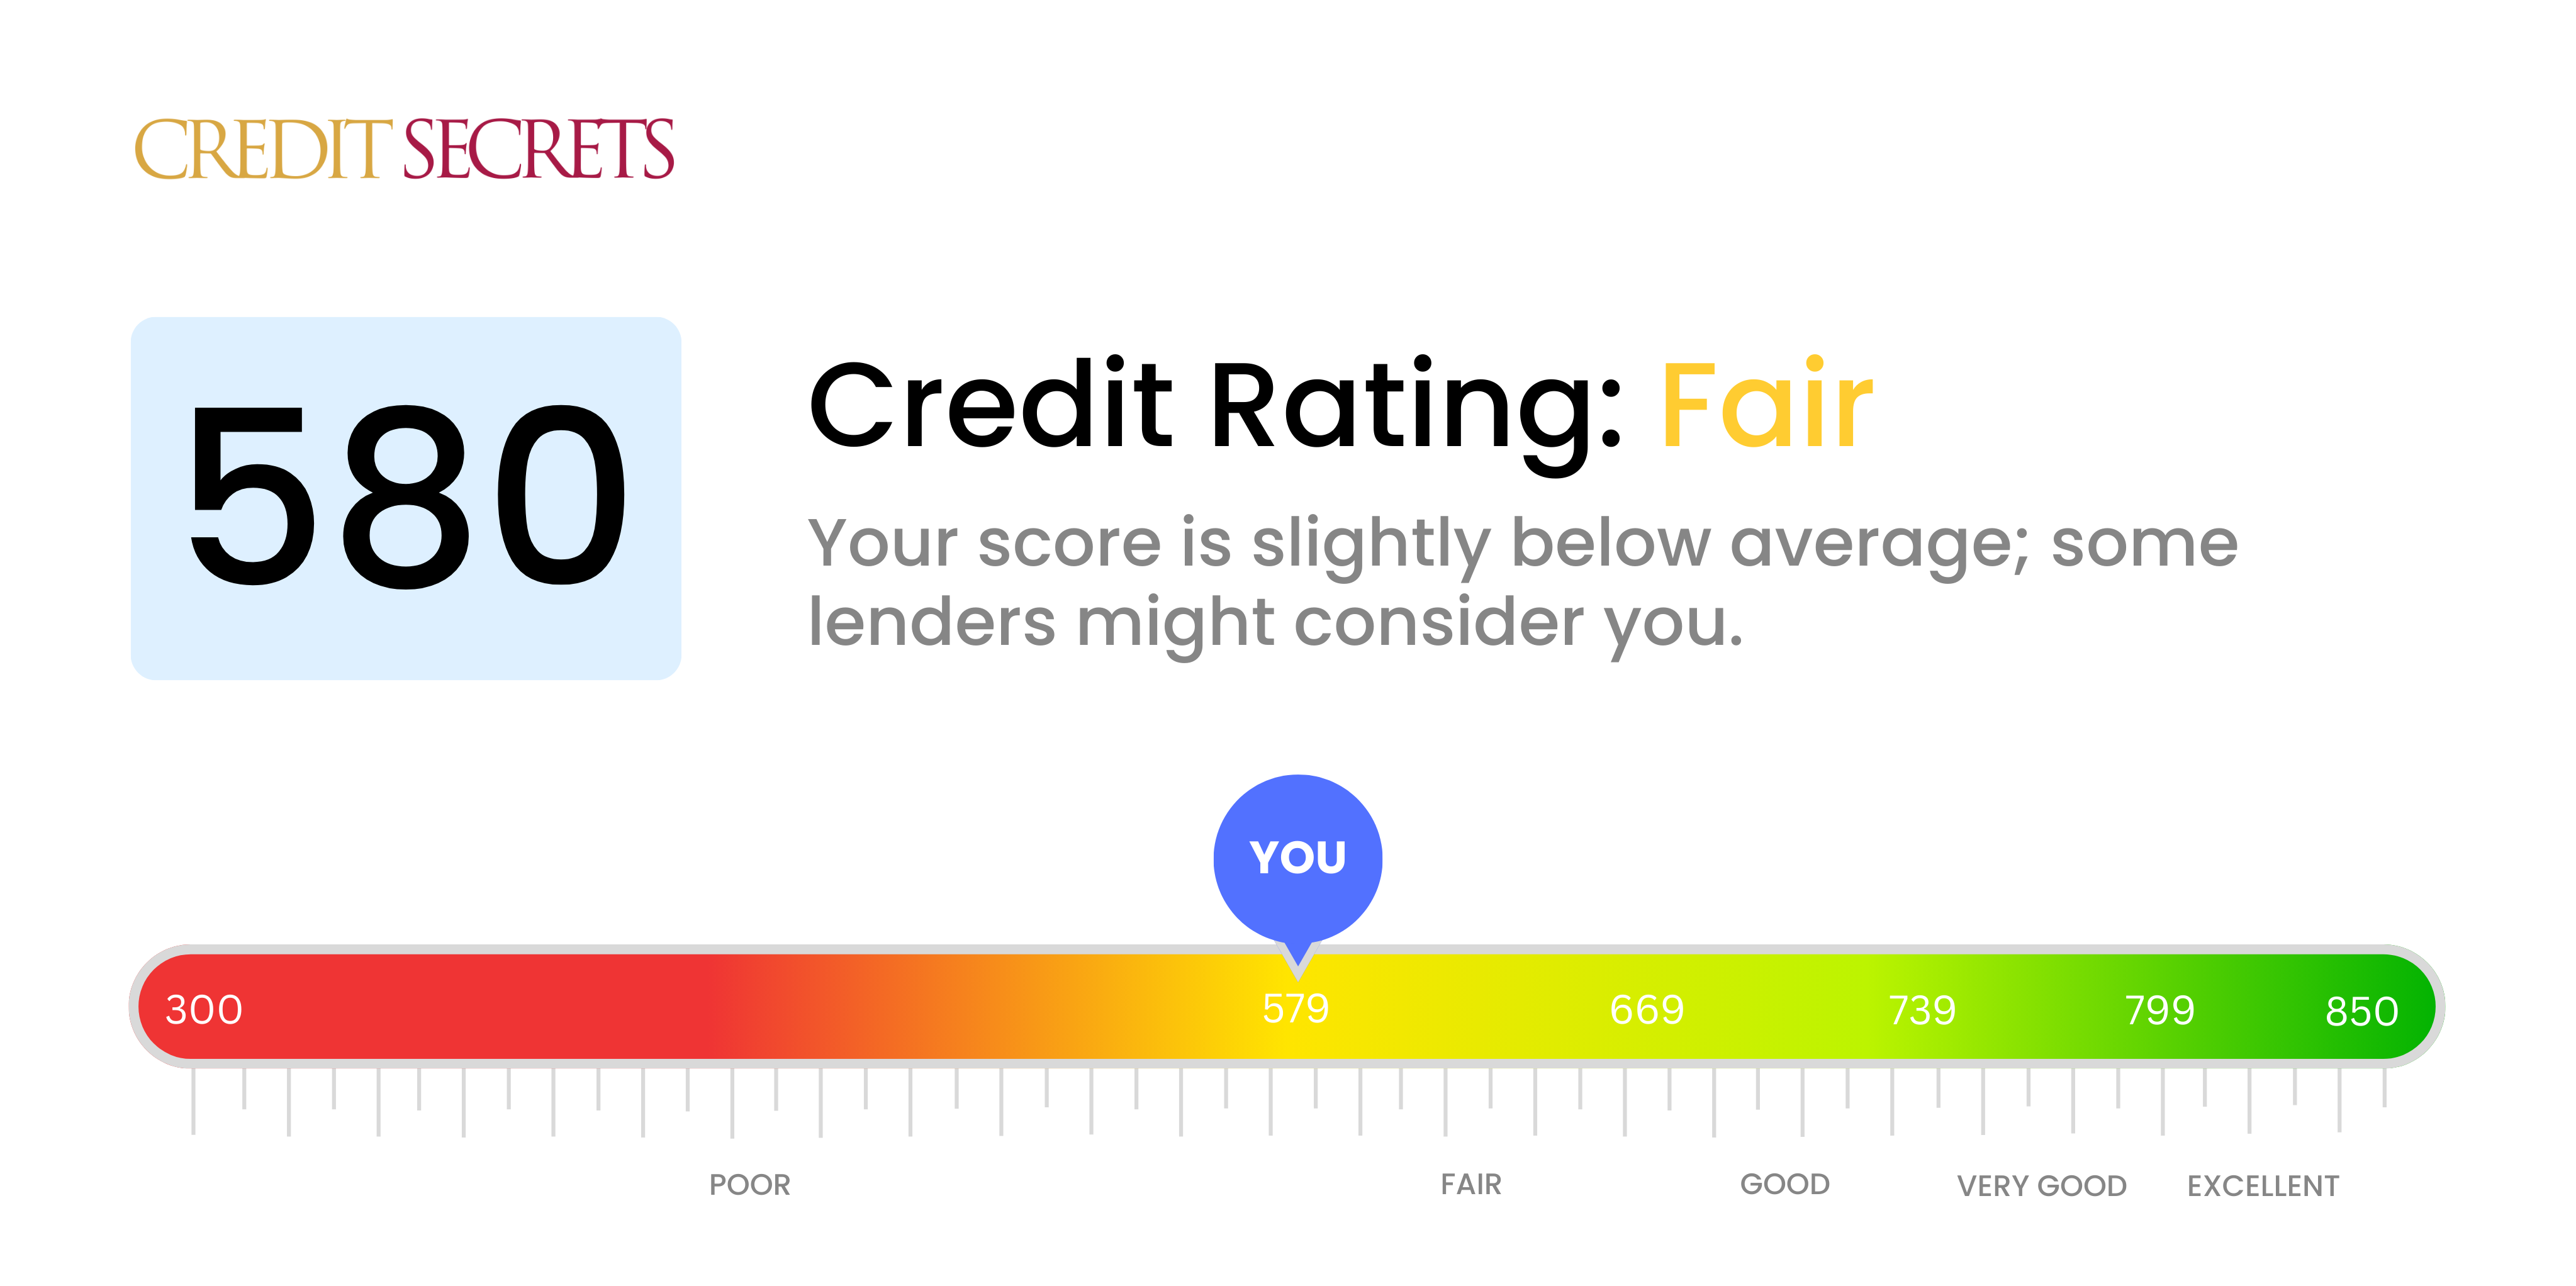 Is 580 a good credit score?